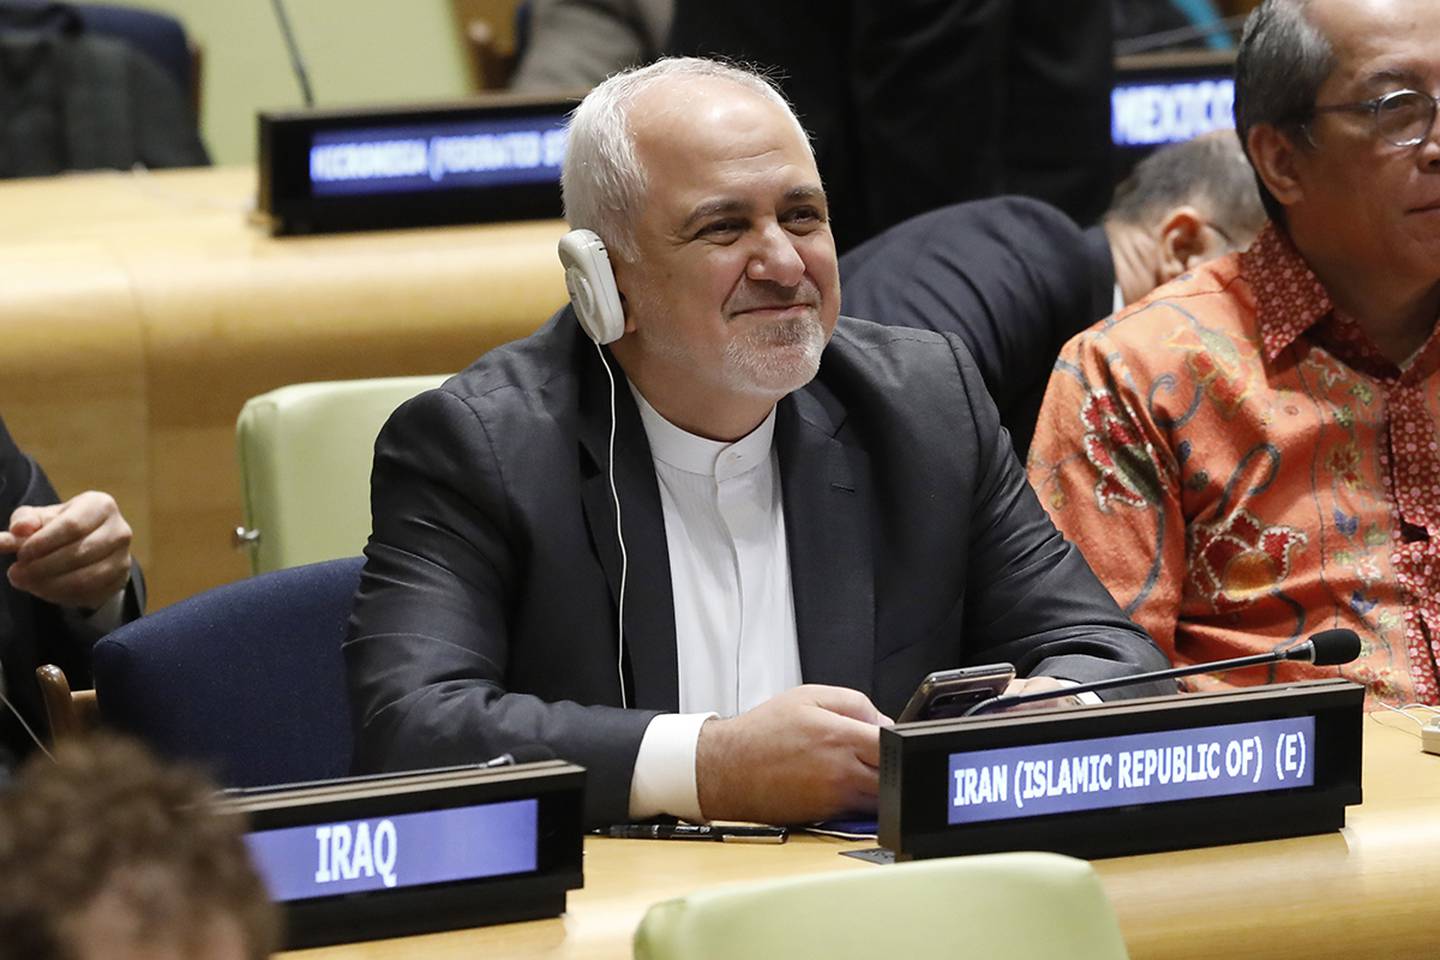 Iran's Foreign Minister Javad Zarif prepares to address the High Level Political Forum on Sustainable Development at United Nations headquarters, Wednesday, July 17, 2019.